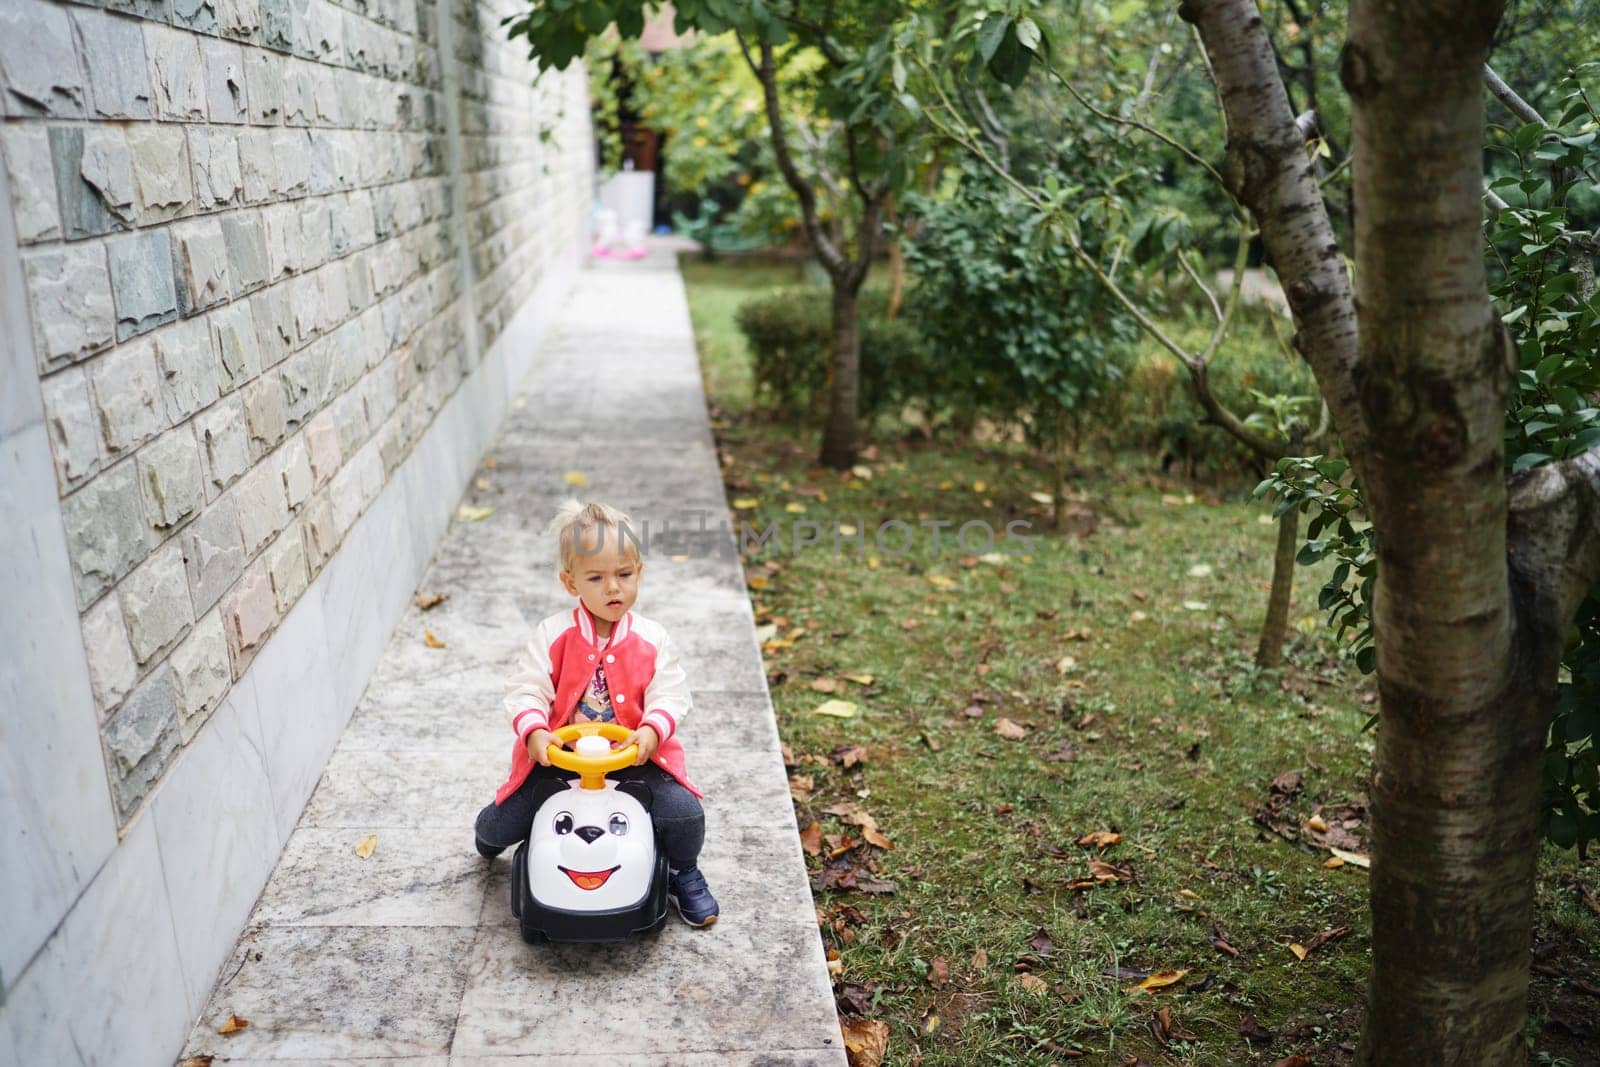 Little girl rides a colorful toy car along the wall in the garden by Nadtochiy